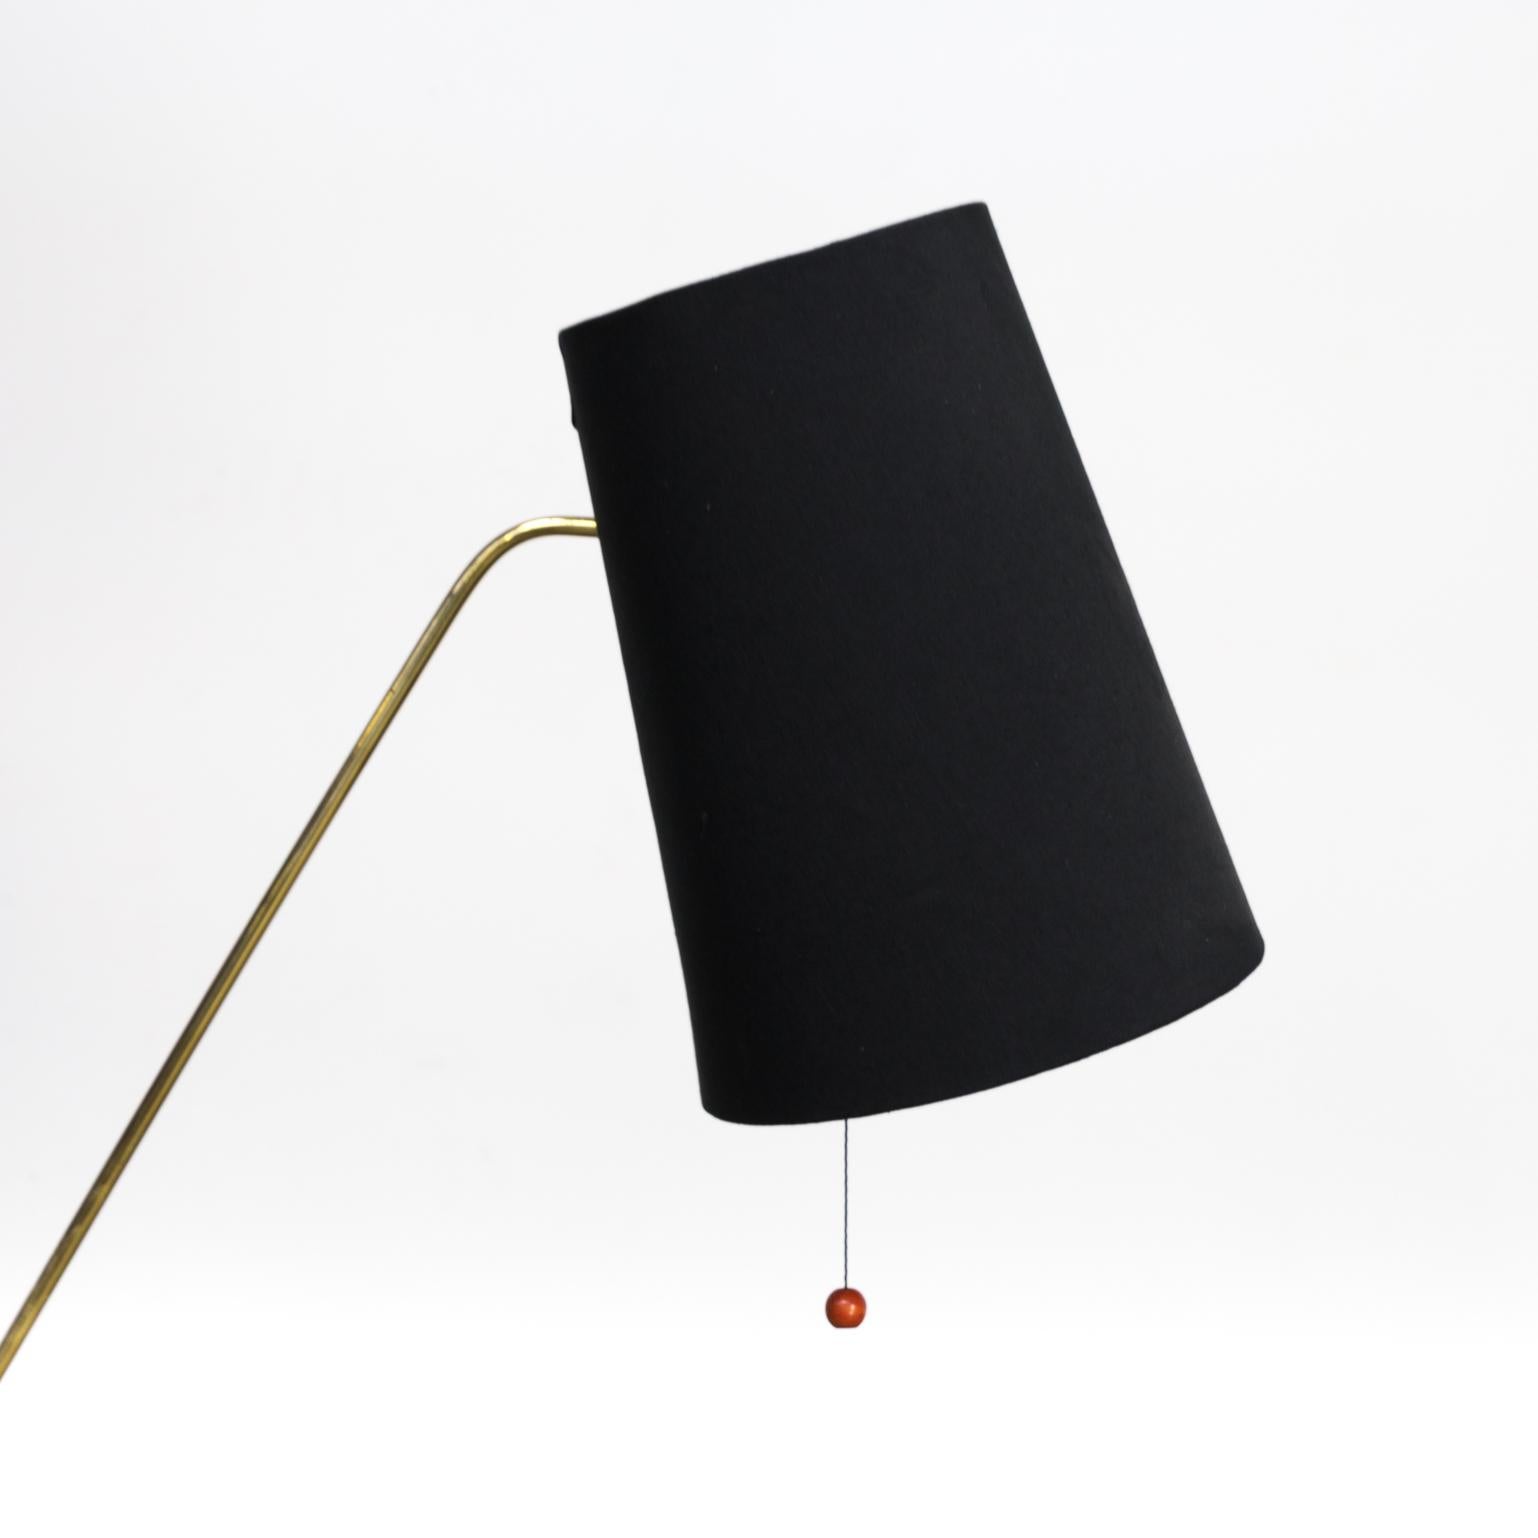 1950s Hans Bergström Floor Lamp with Adjustable Fabric Shade for Ateljé Lyktan For Sale 2